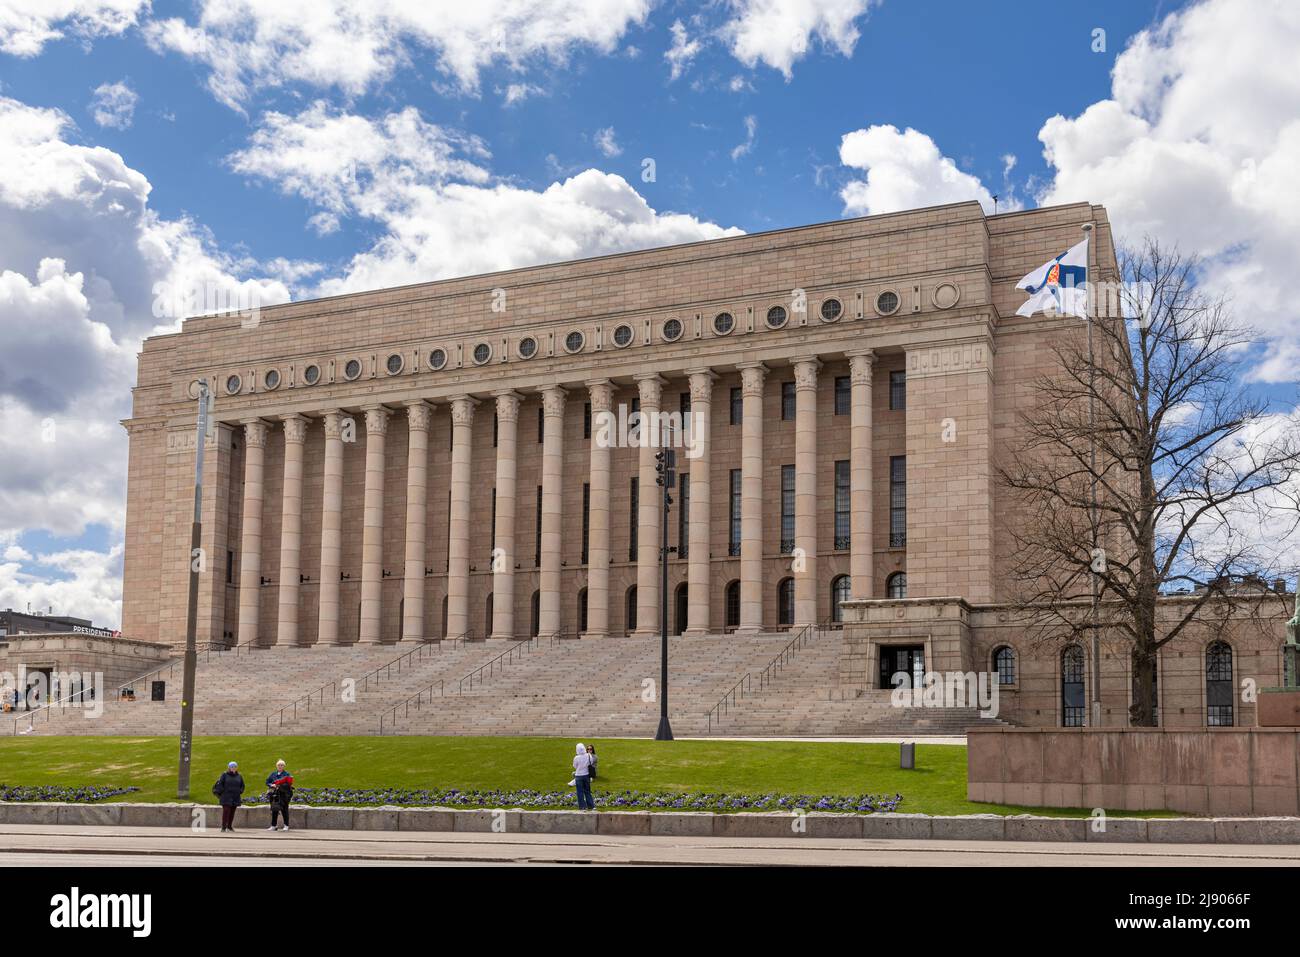 Finnish Parliament building with famous red granite colonnade Stock Photo